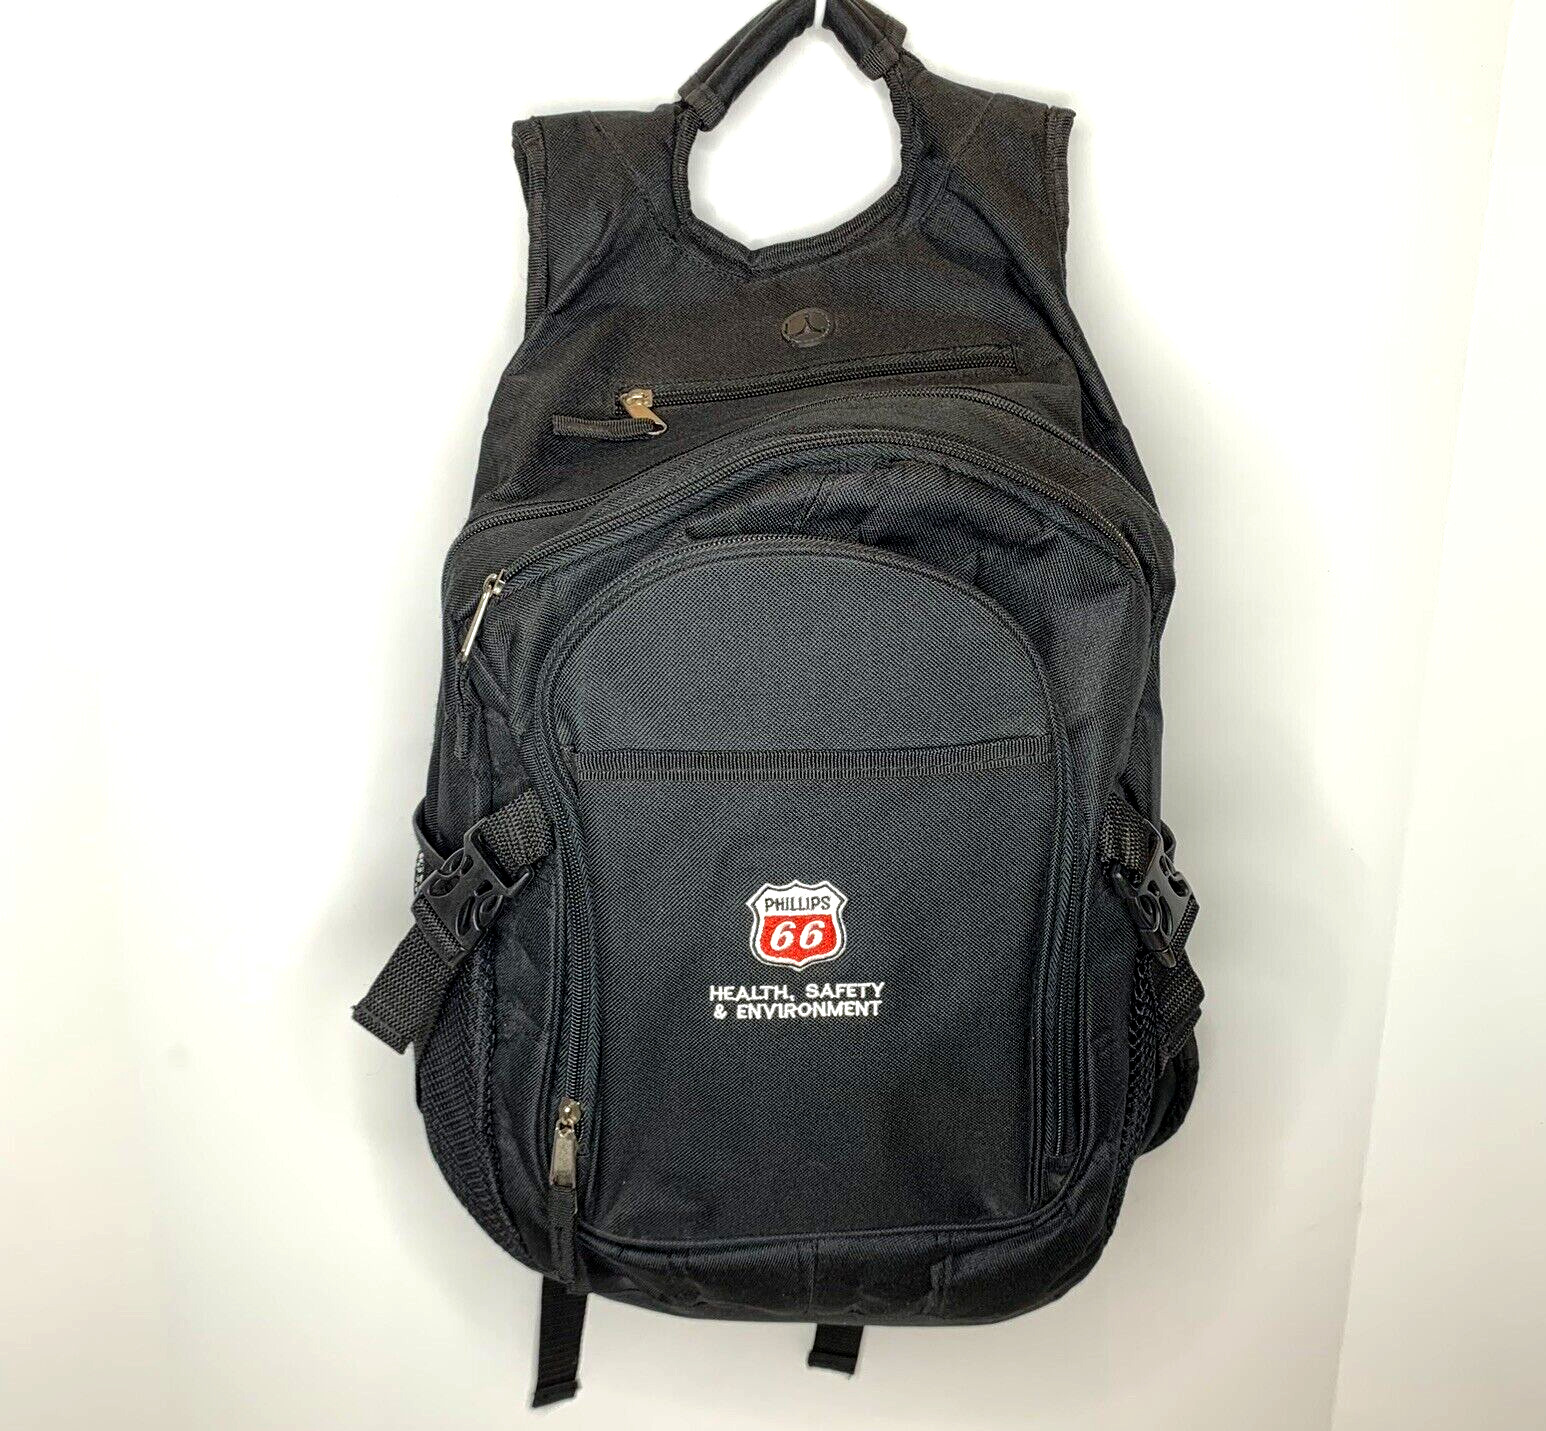 Phillips 66 Employee Backpack Book Bag - Black - Health Safety Environment Logo